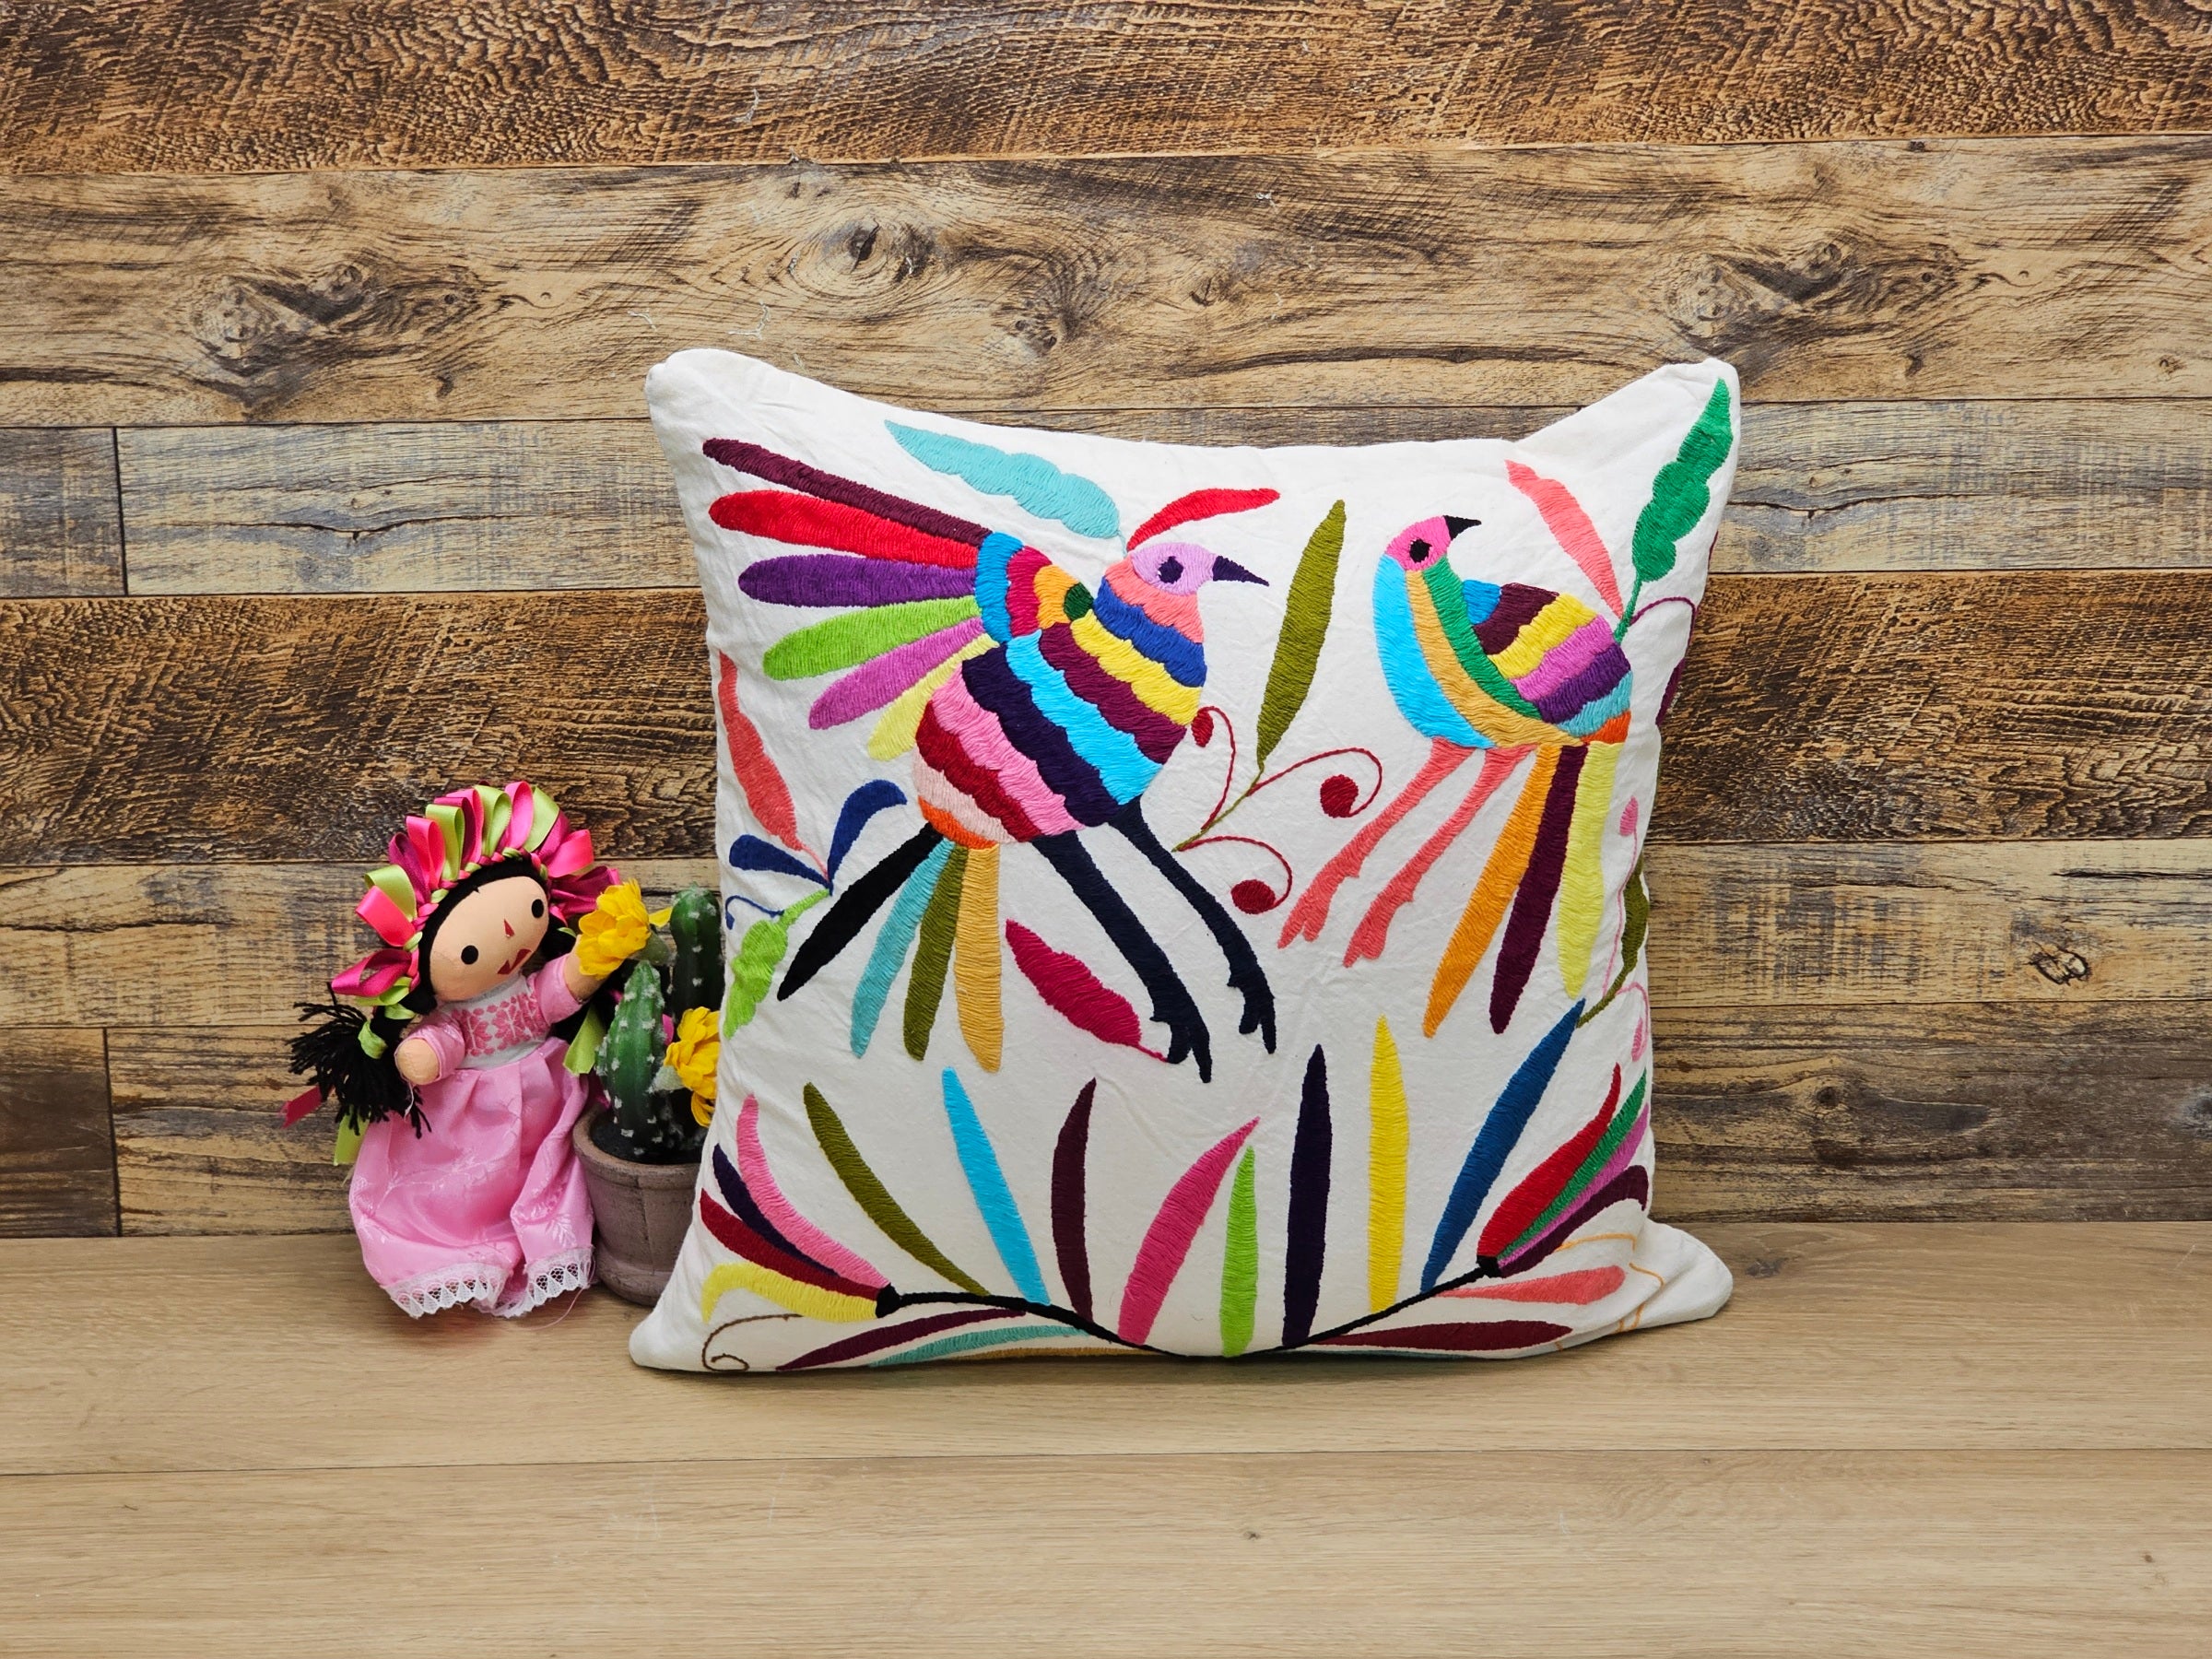 Square Otomi Tenango Pillow Cover with Hand Embroidered Birds and Plants in Vibrant Colors. Handmade in Mexico. Ships from the USA. Buy now at www.felipeandgrace.com.